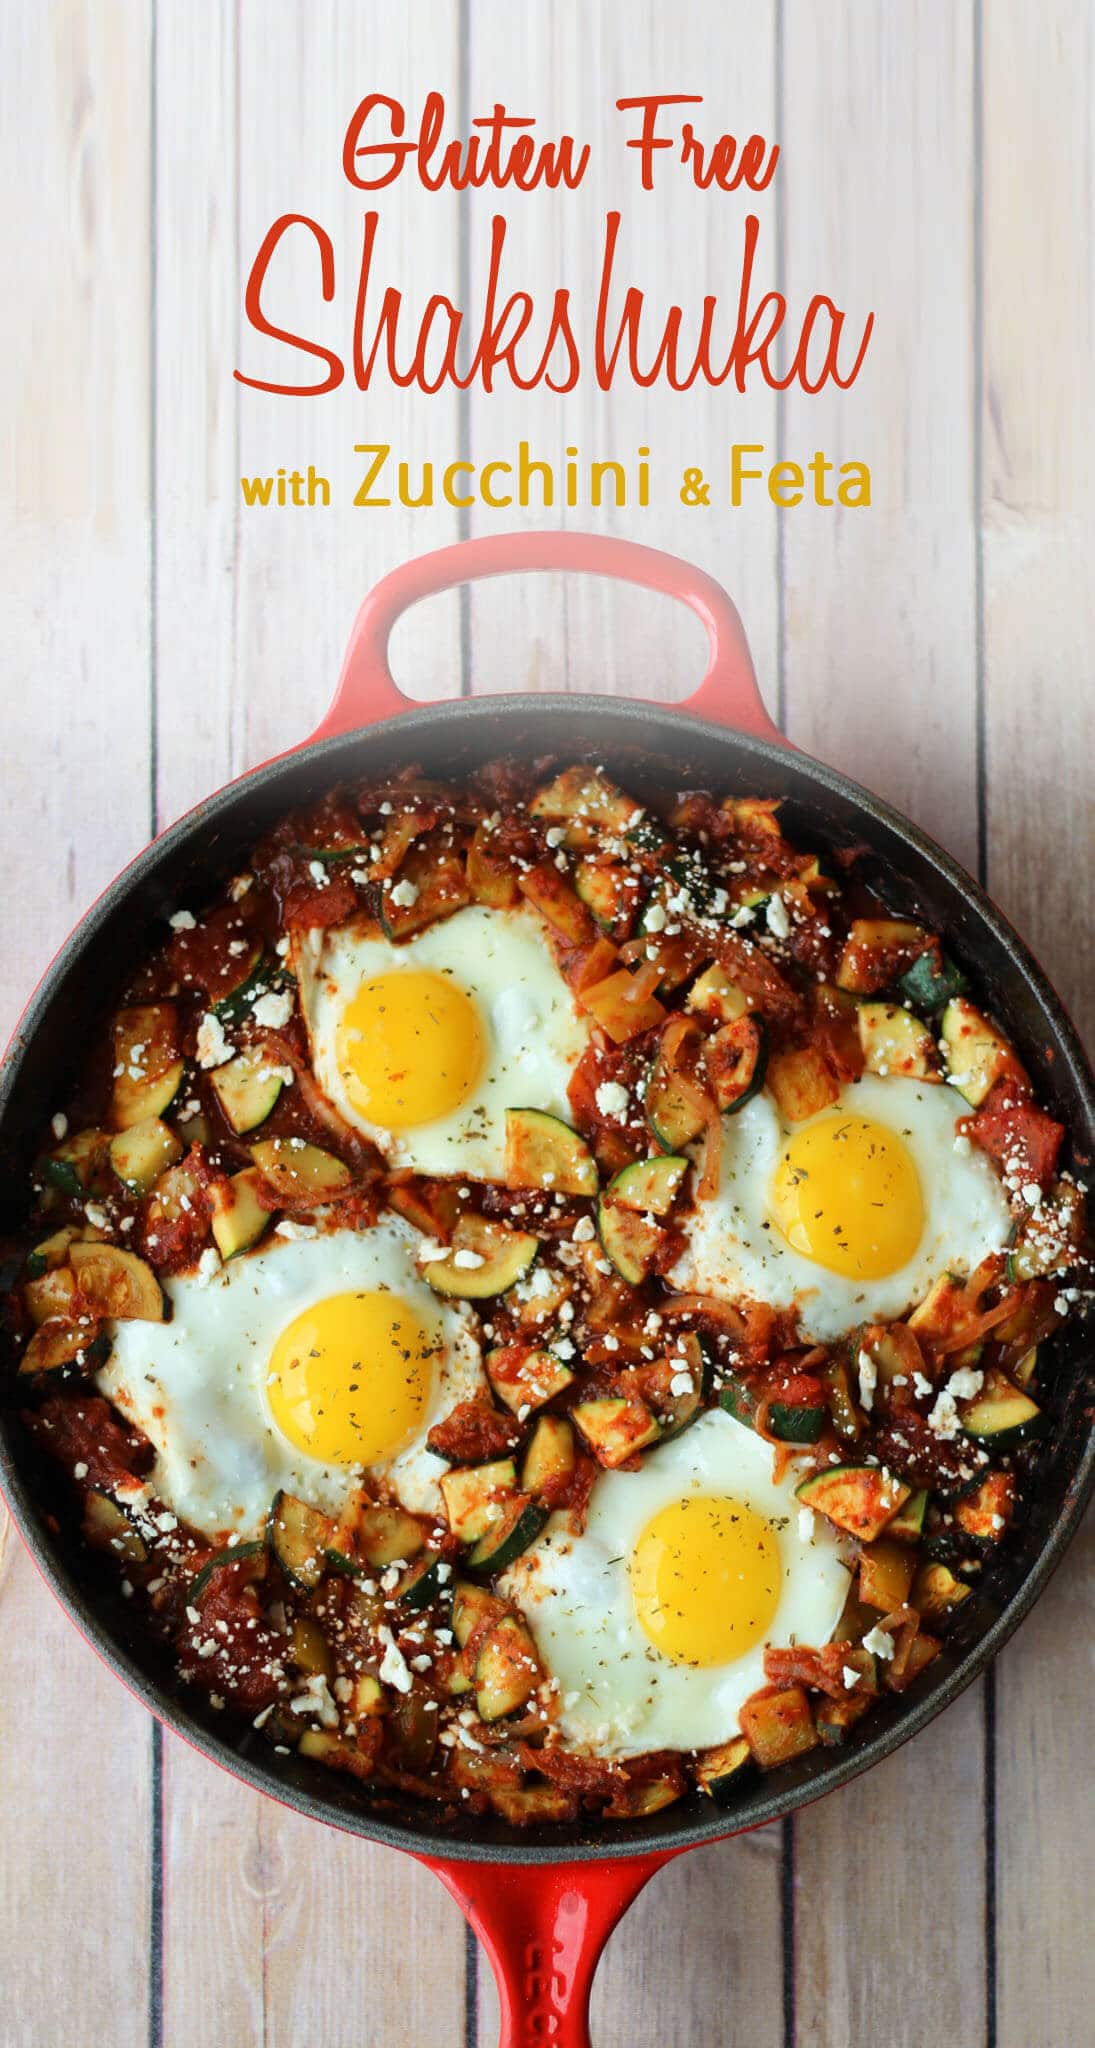 This easy one-pot gluten free Shakshuka recipe with zucchini and feta is super healthy, low in fat and vegetarian.